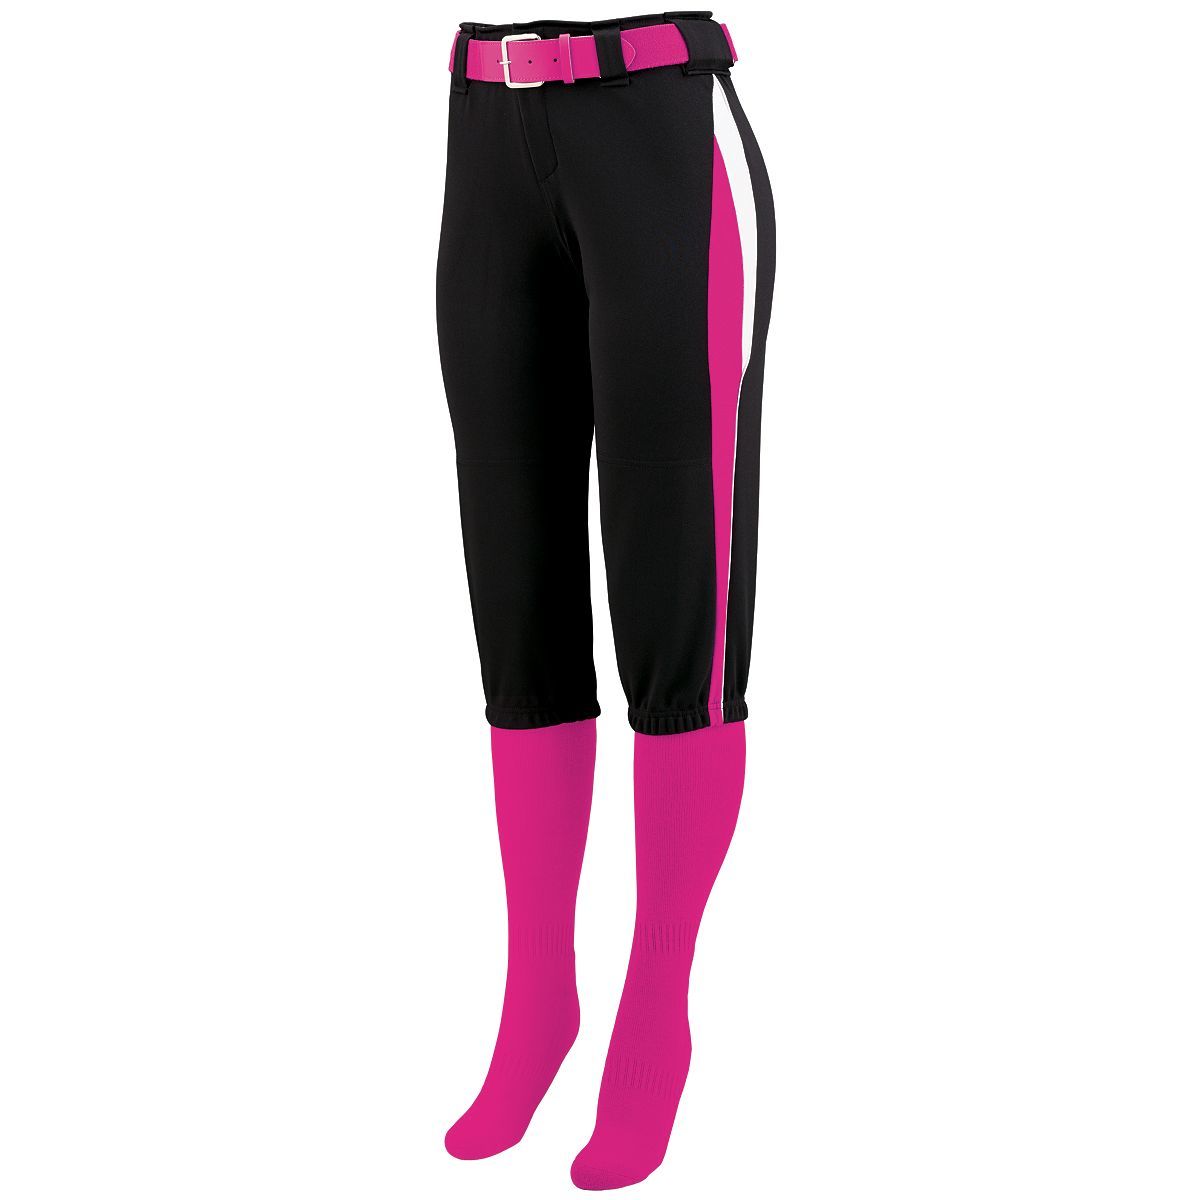 Augusta Sportswear Ladies Comet Pant in Black/Power Pink/White  -Part of the Ladies, Ladies-Pants, Pants, Augusta-Products, Softball product lines at KanaleyCreations.com